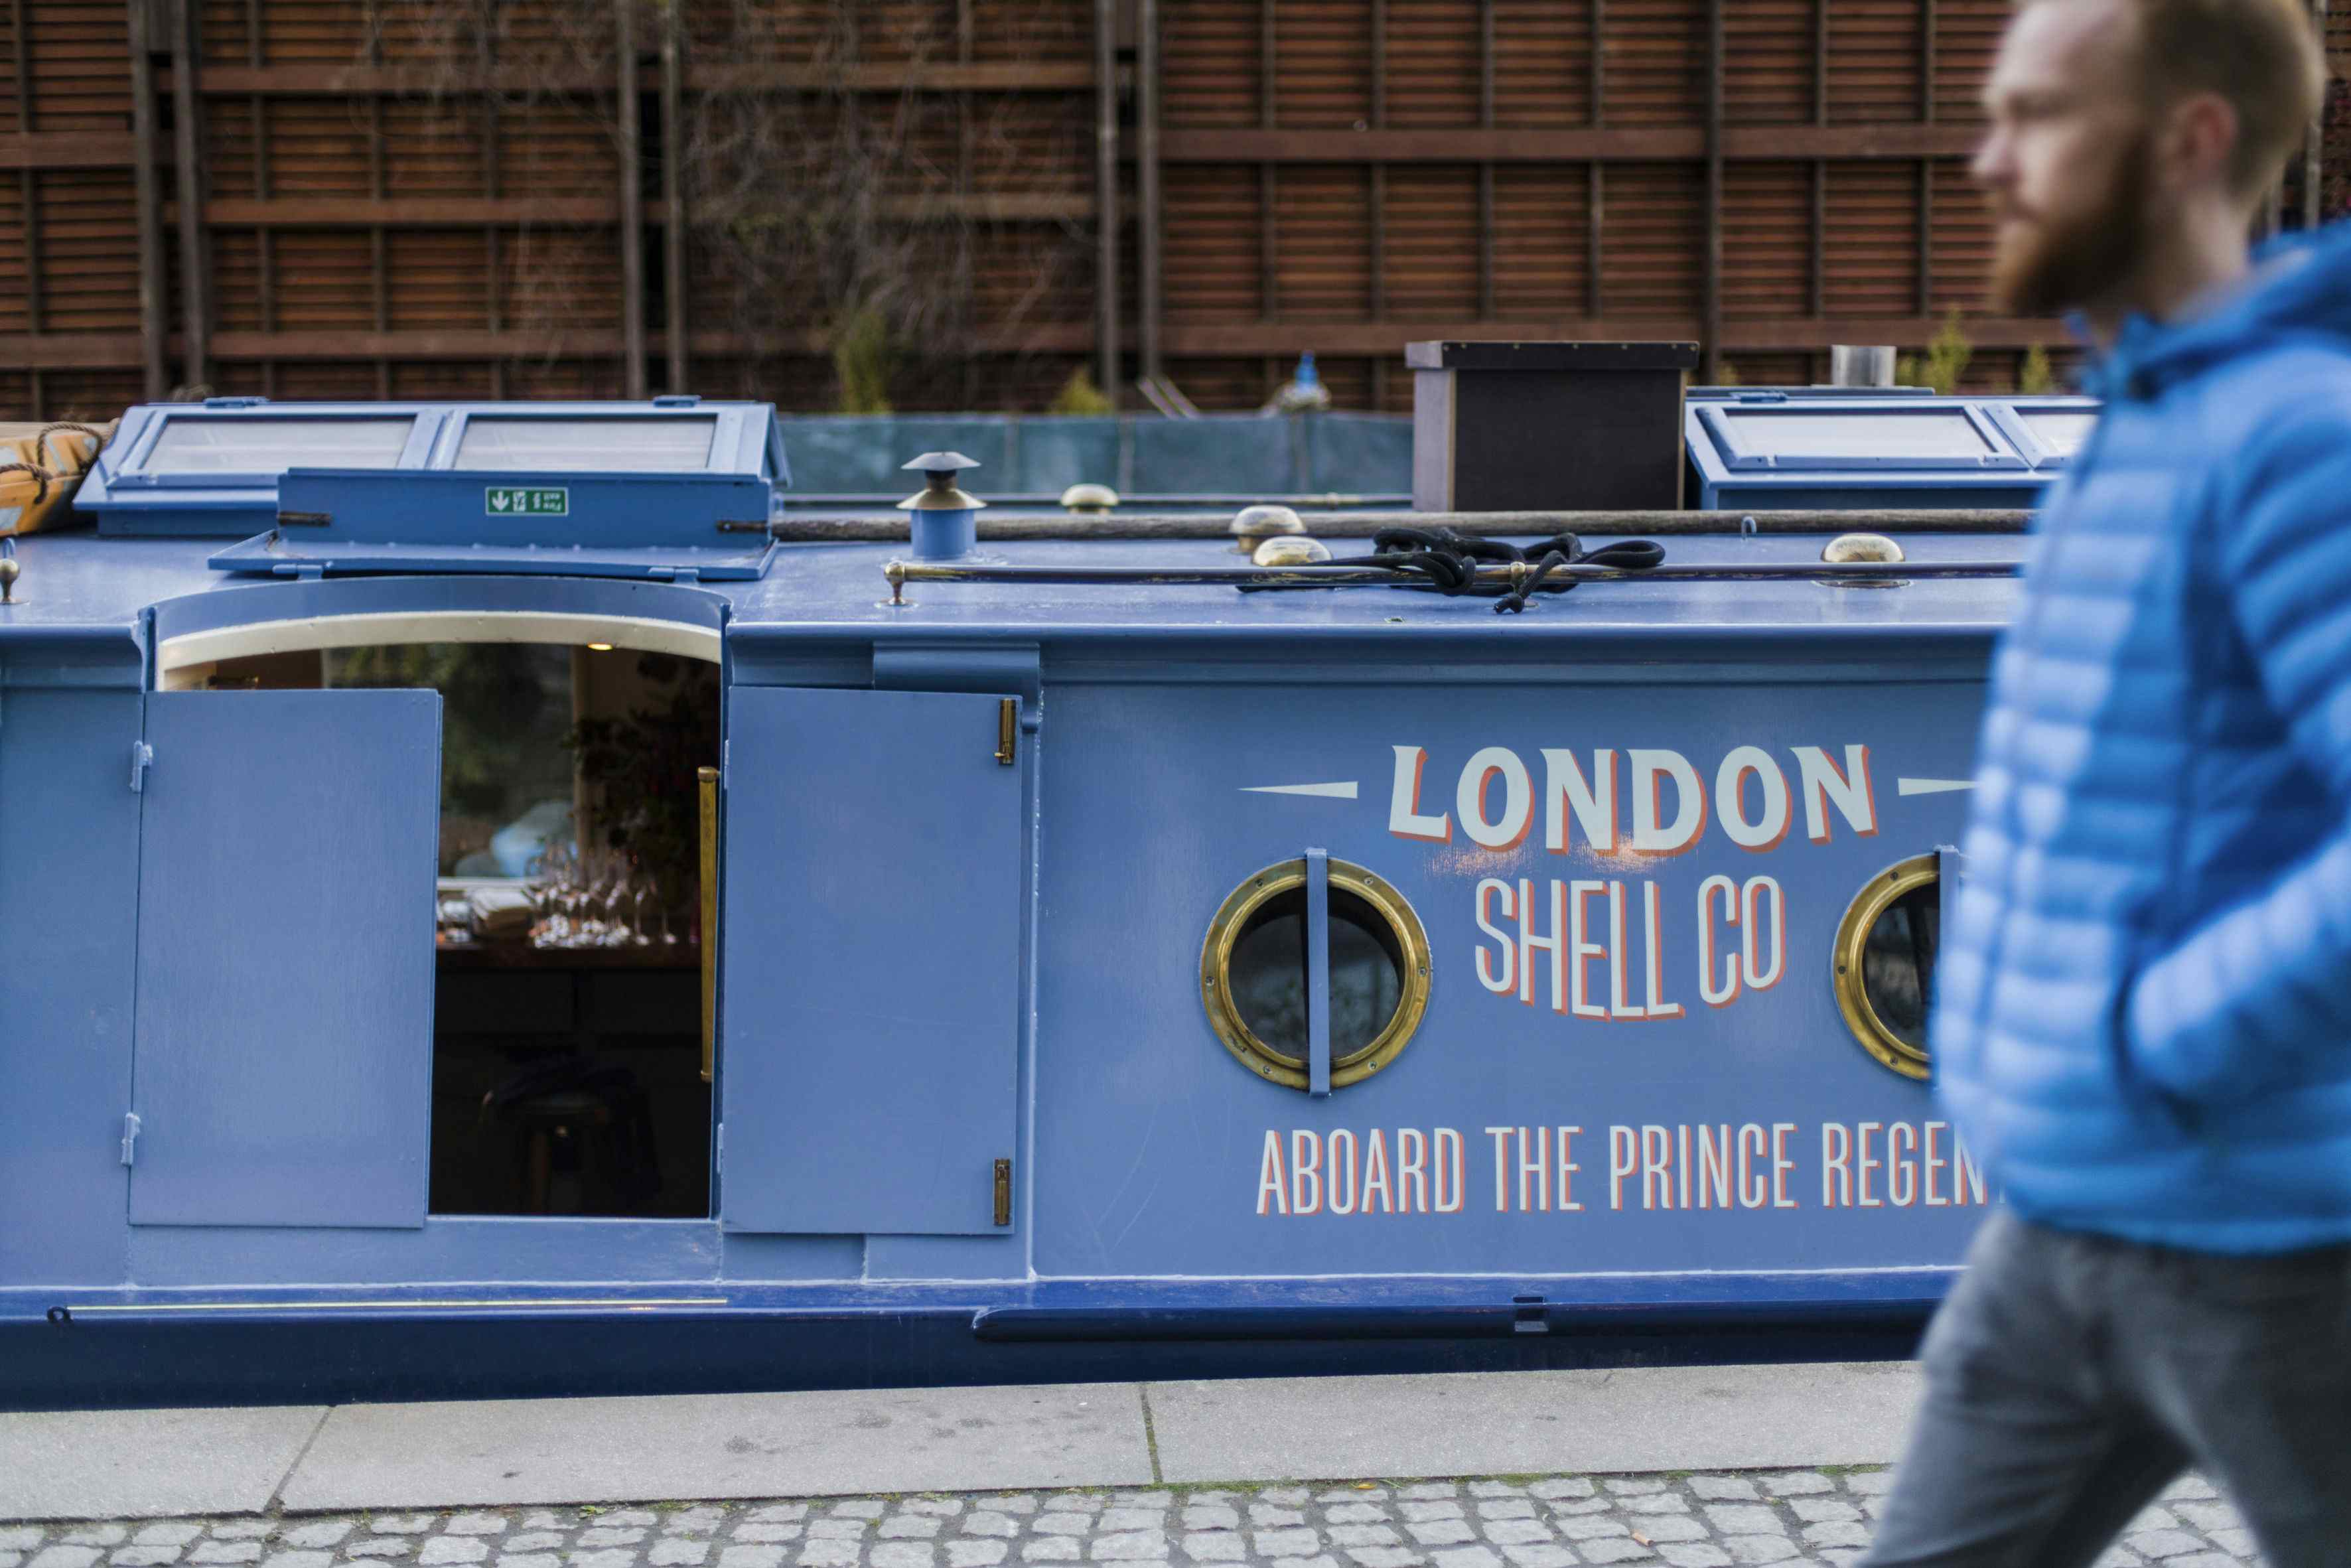 Seafood Restaurant on A Boat, London Shell Co. Aboard The Prince Regent